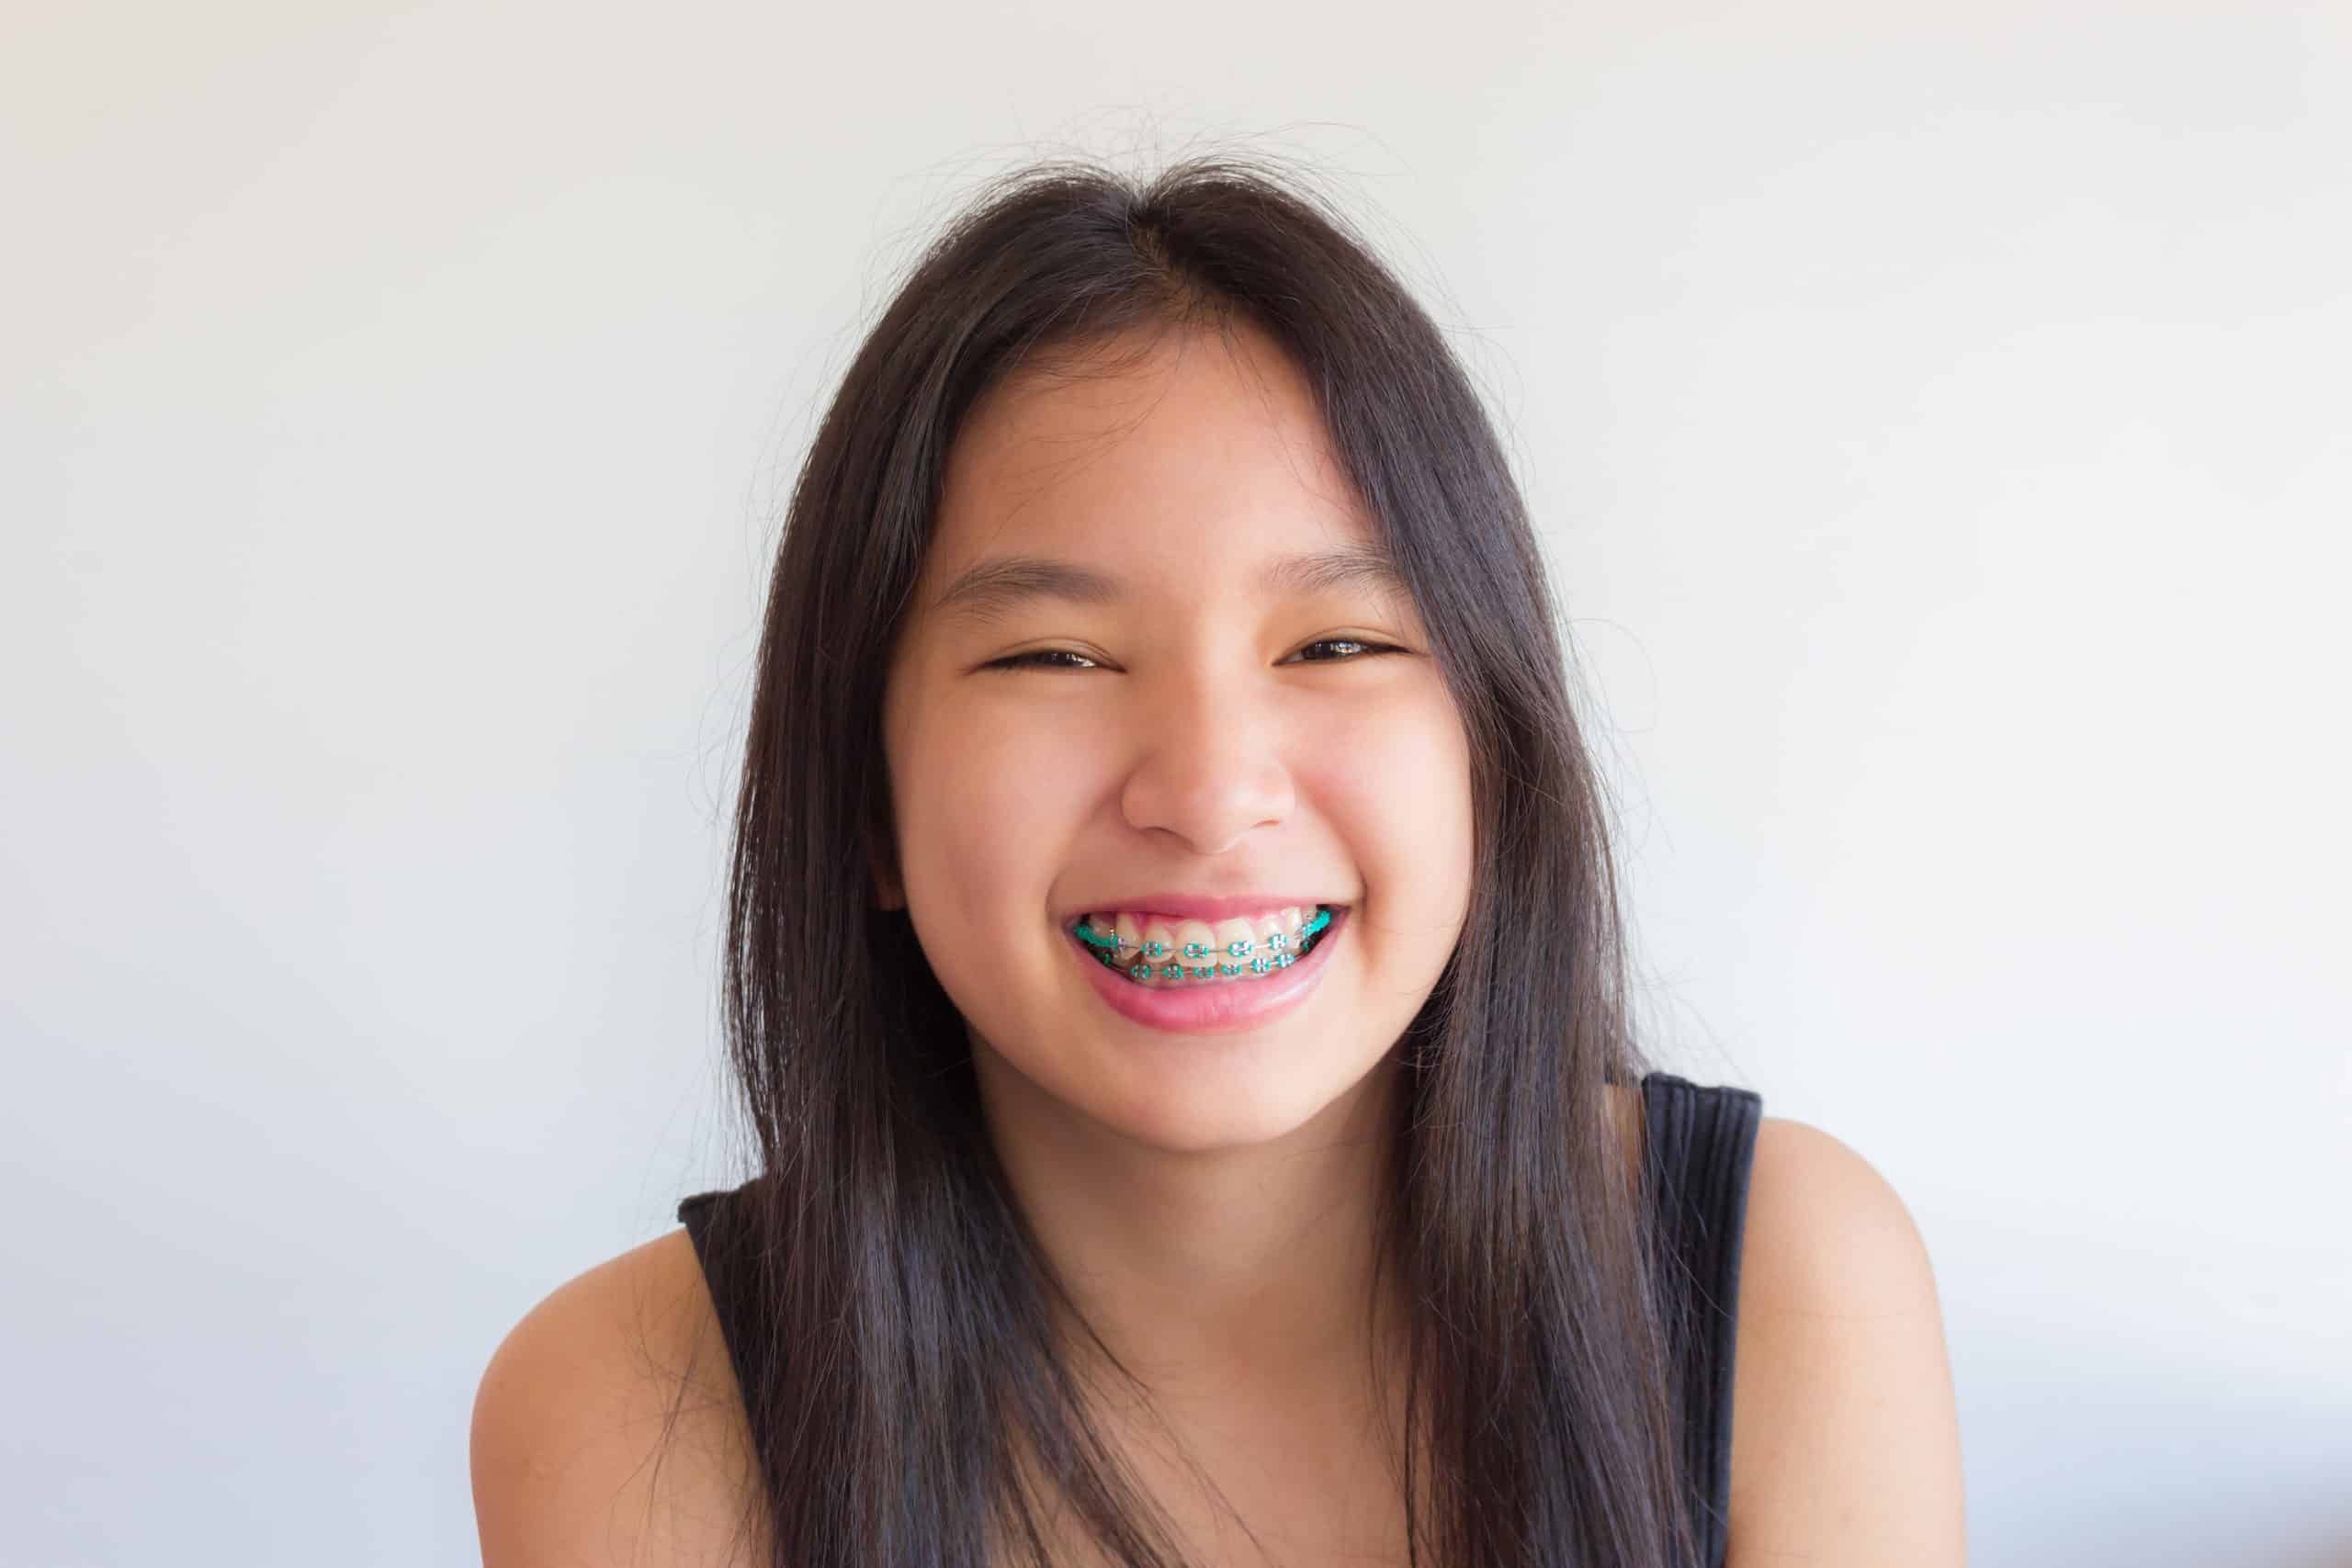 Asian Girl Has Braces And Shes Smiling Happily